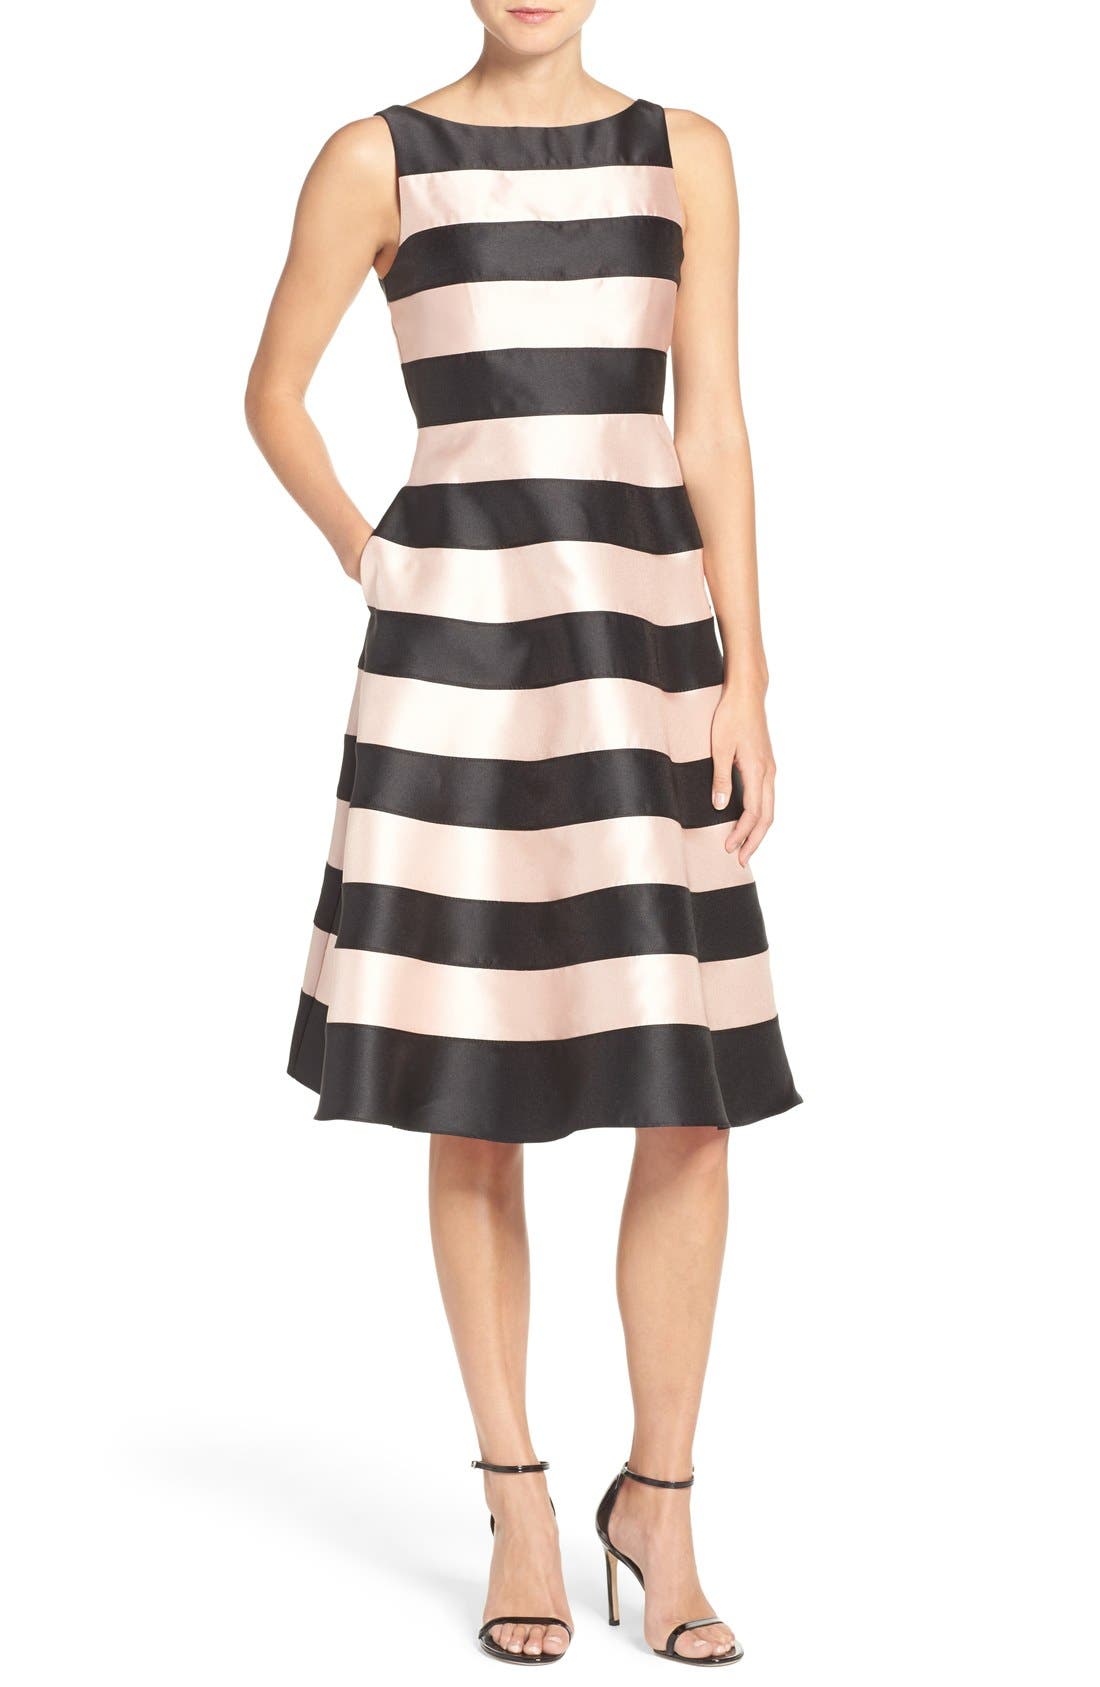 adrianna papell dresses nordstrom